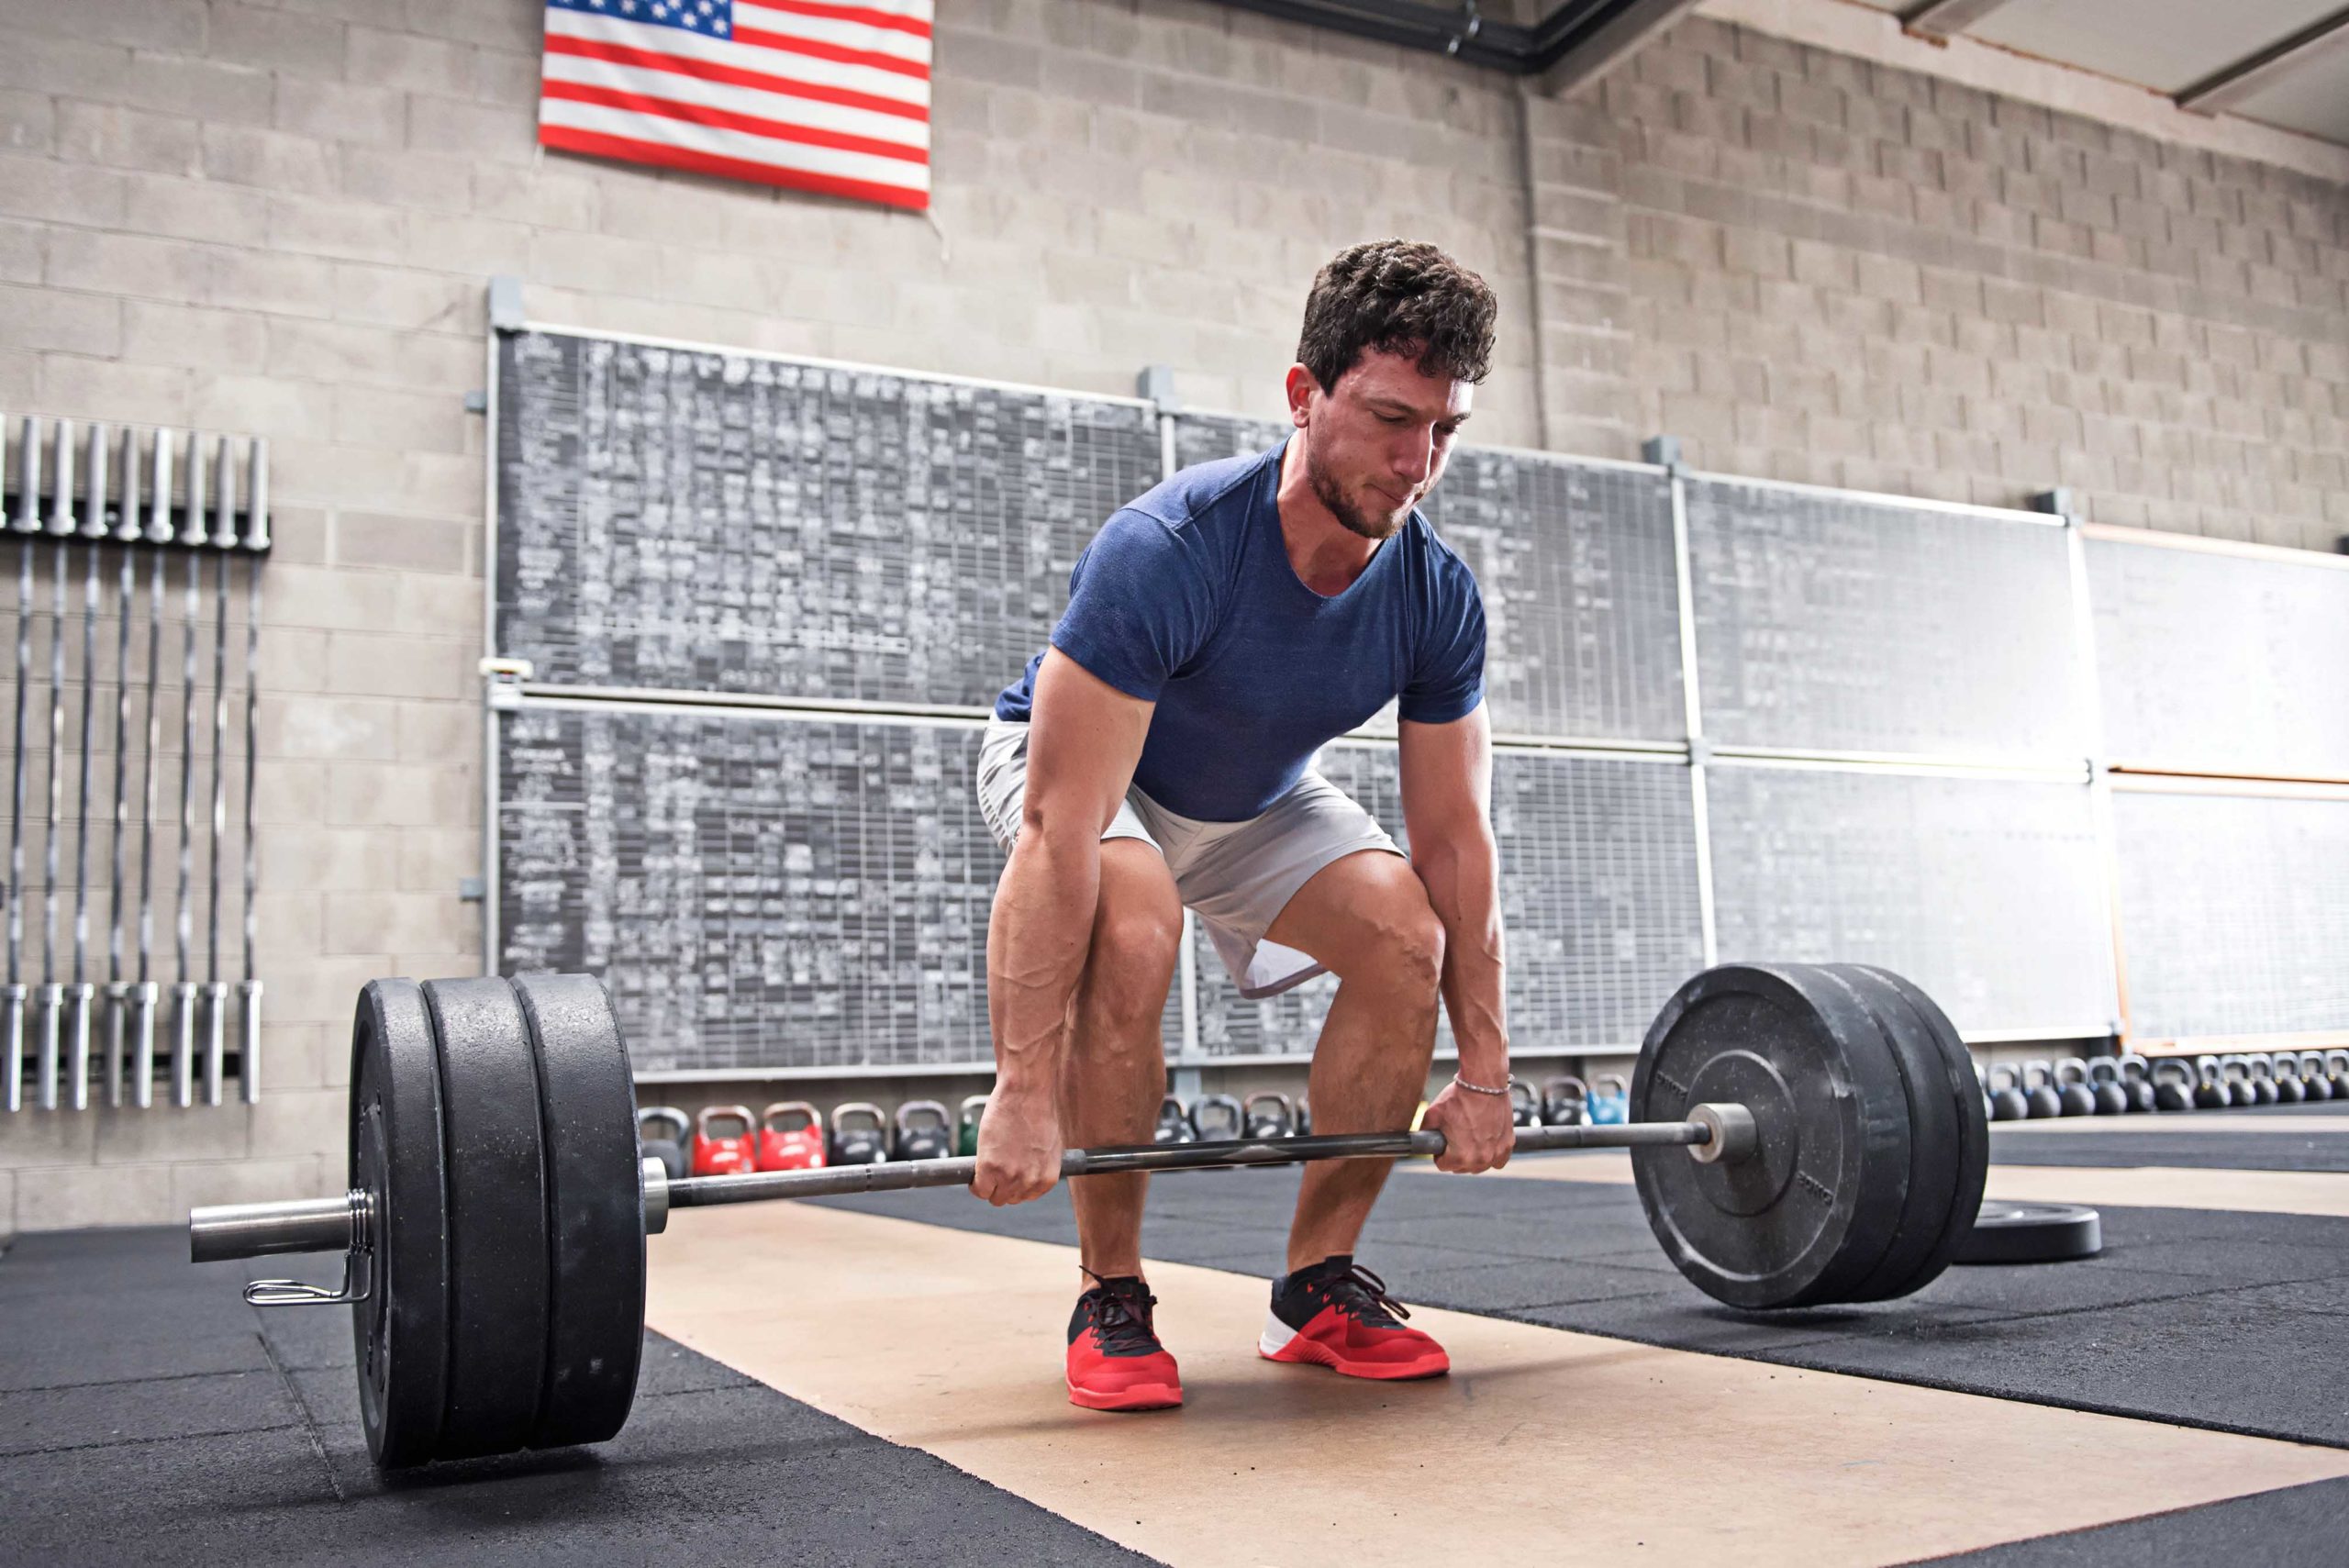 How To Deadlift Properly - Trainers Share Form Tips, Variations, Benefits